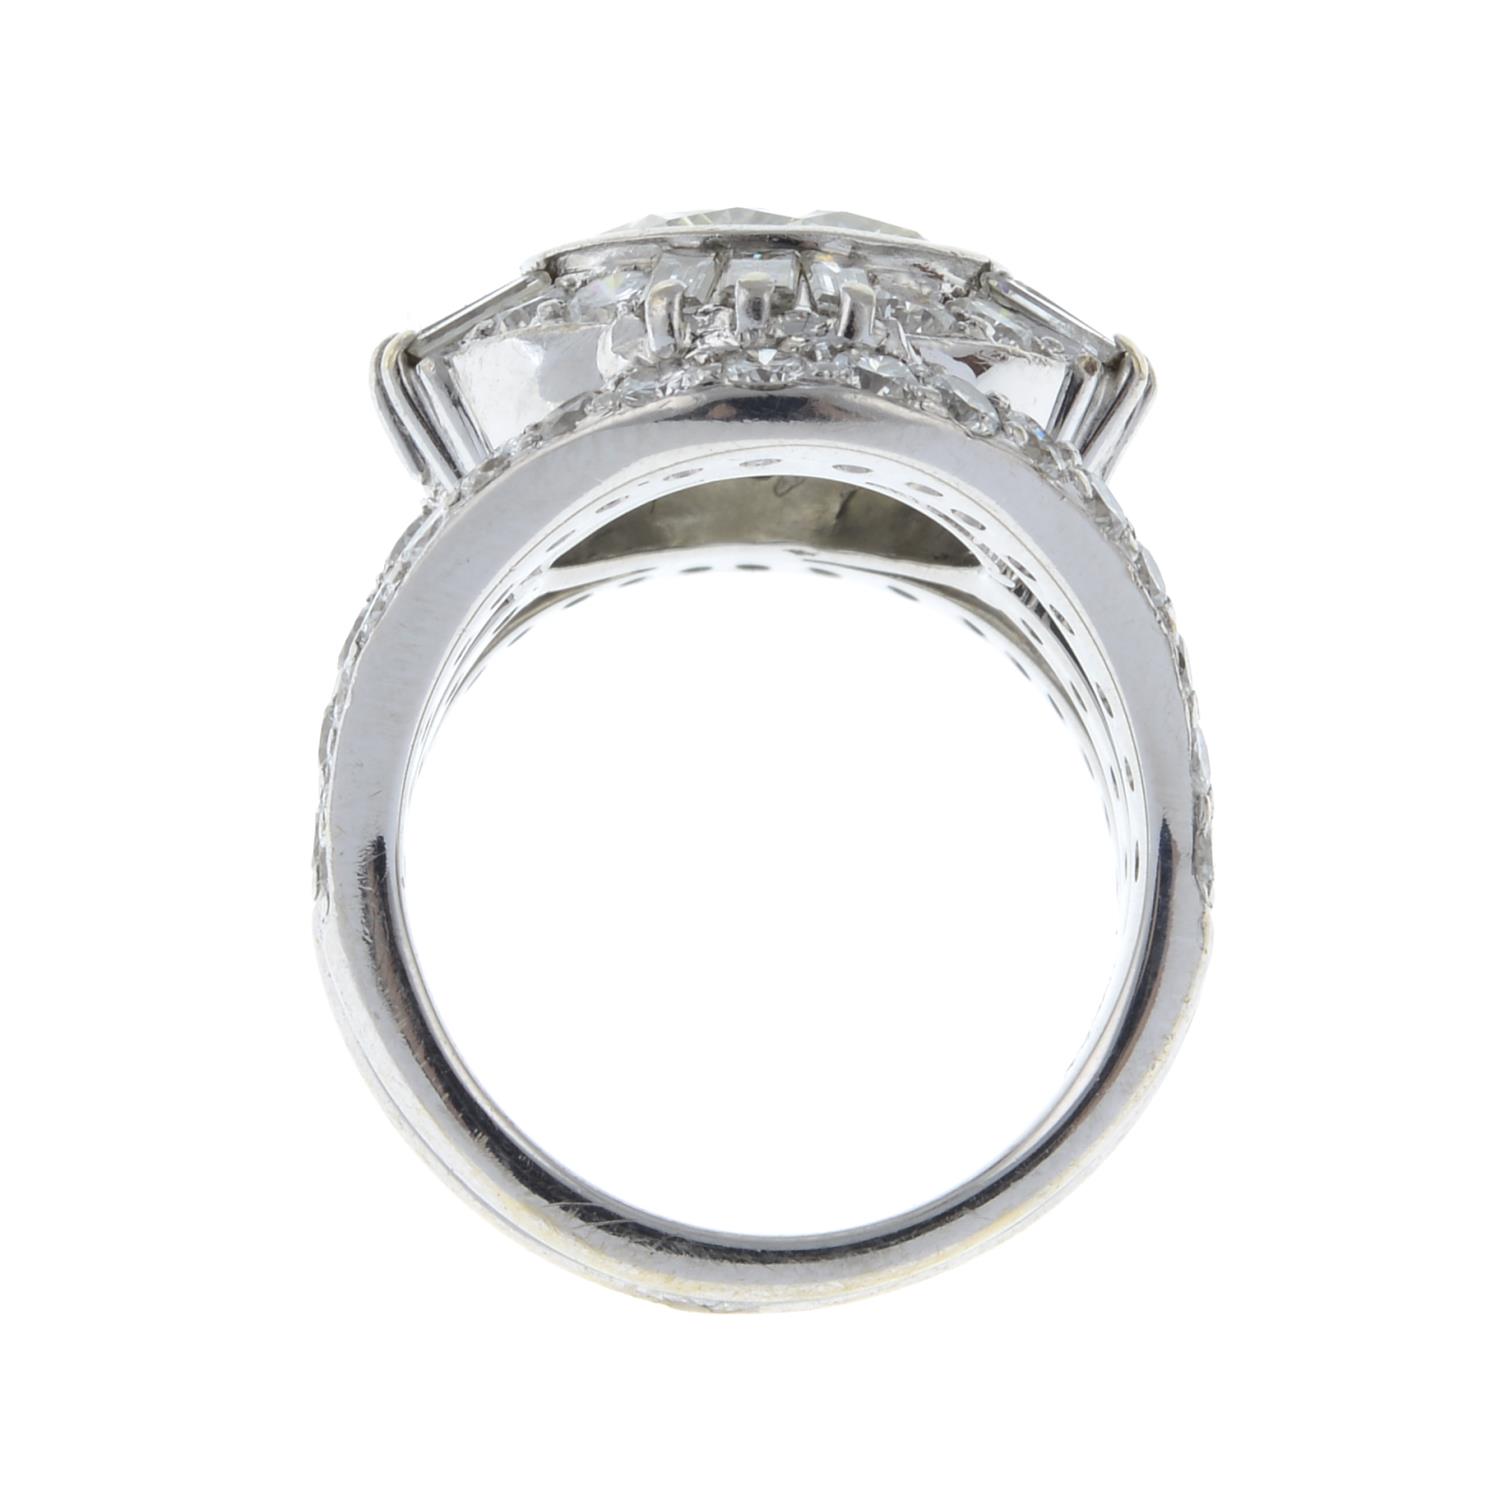 An 18ct gold diamond cocktail ring.Principal diamond estimated weight 3.20cts, - Image 6 of 6